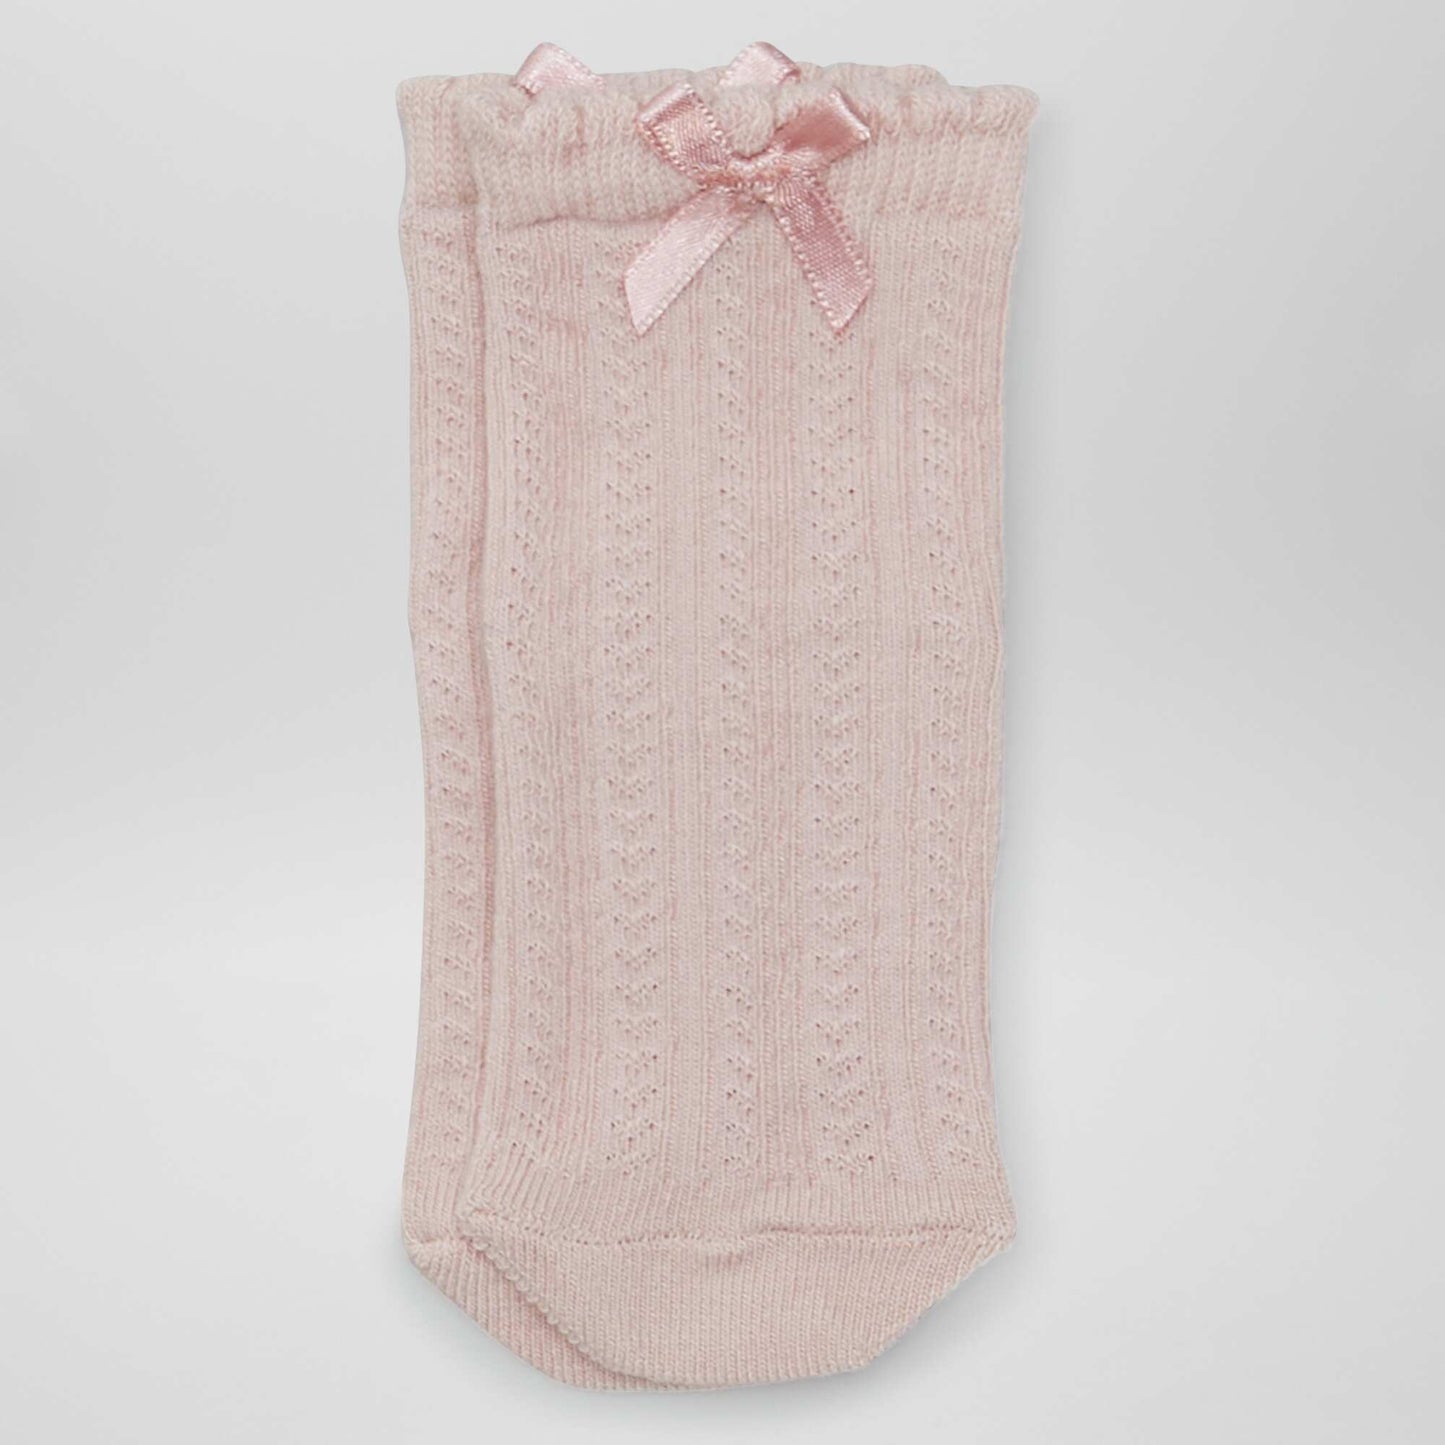 Pack of patterned socks - 2 pairs PINK